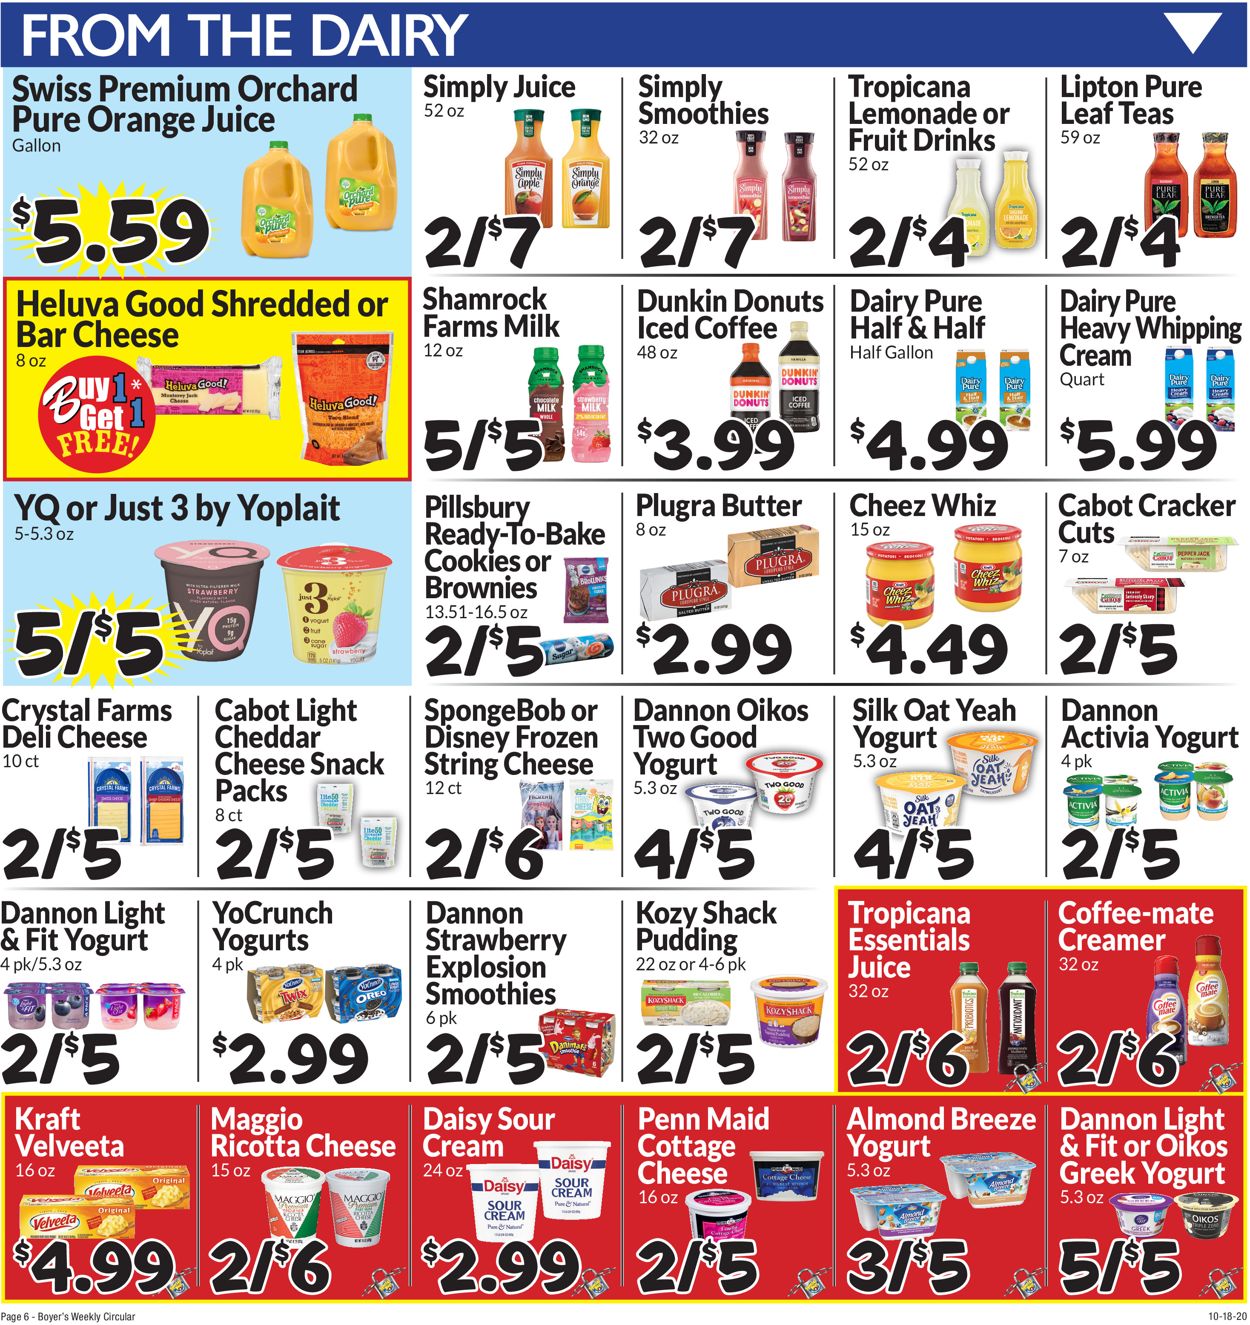 Boyer's Food Markets Current weekly ad 10/18 - 10/24/2020 [9 ...